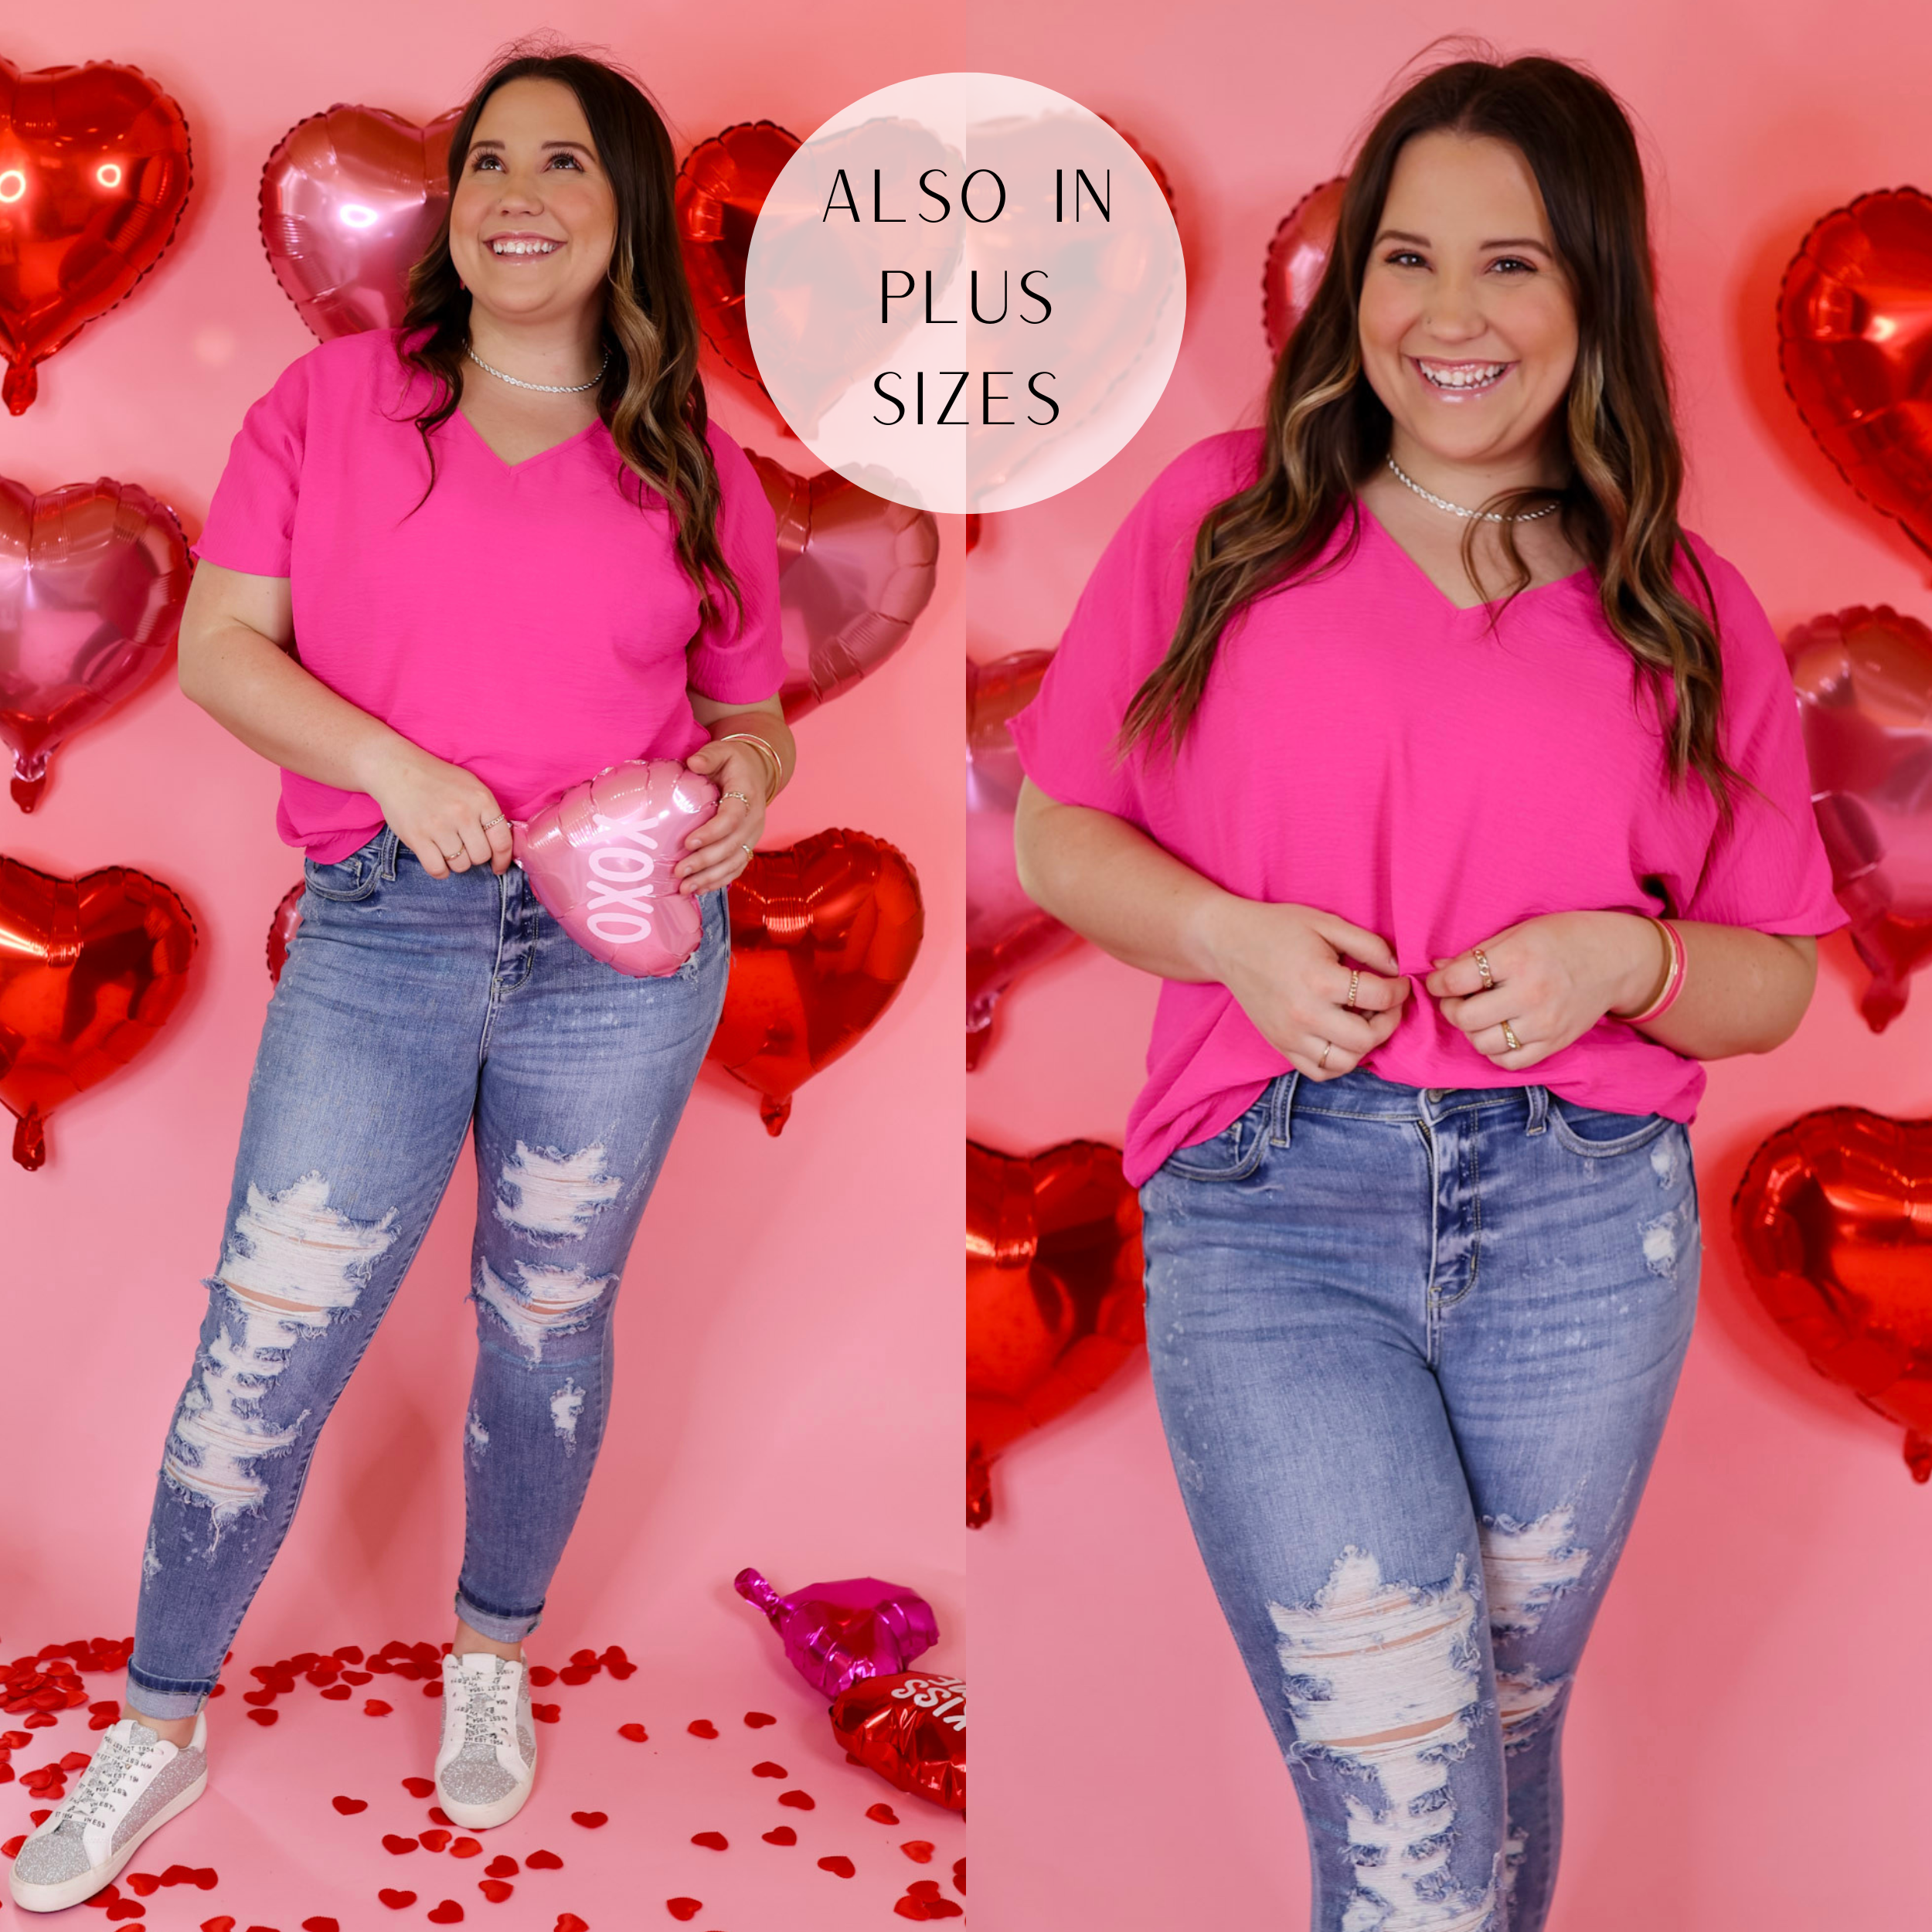 Model is wearing a short sleeve, v neck, top in fuchsia pink. Model has this top paired with jeans, silver sneakers, and silver jewelry. Background is solid pink with red heart balloons. 